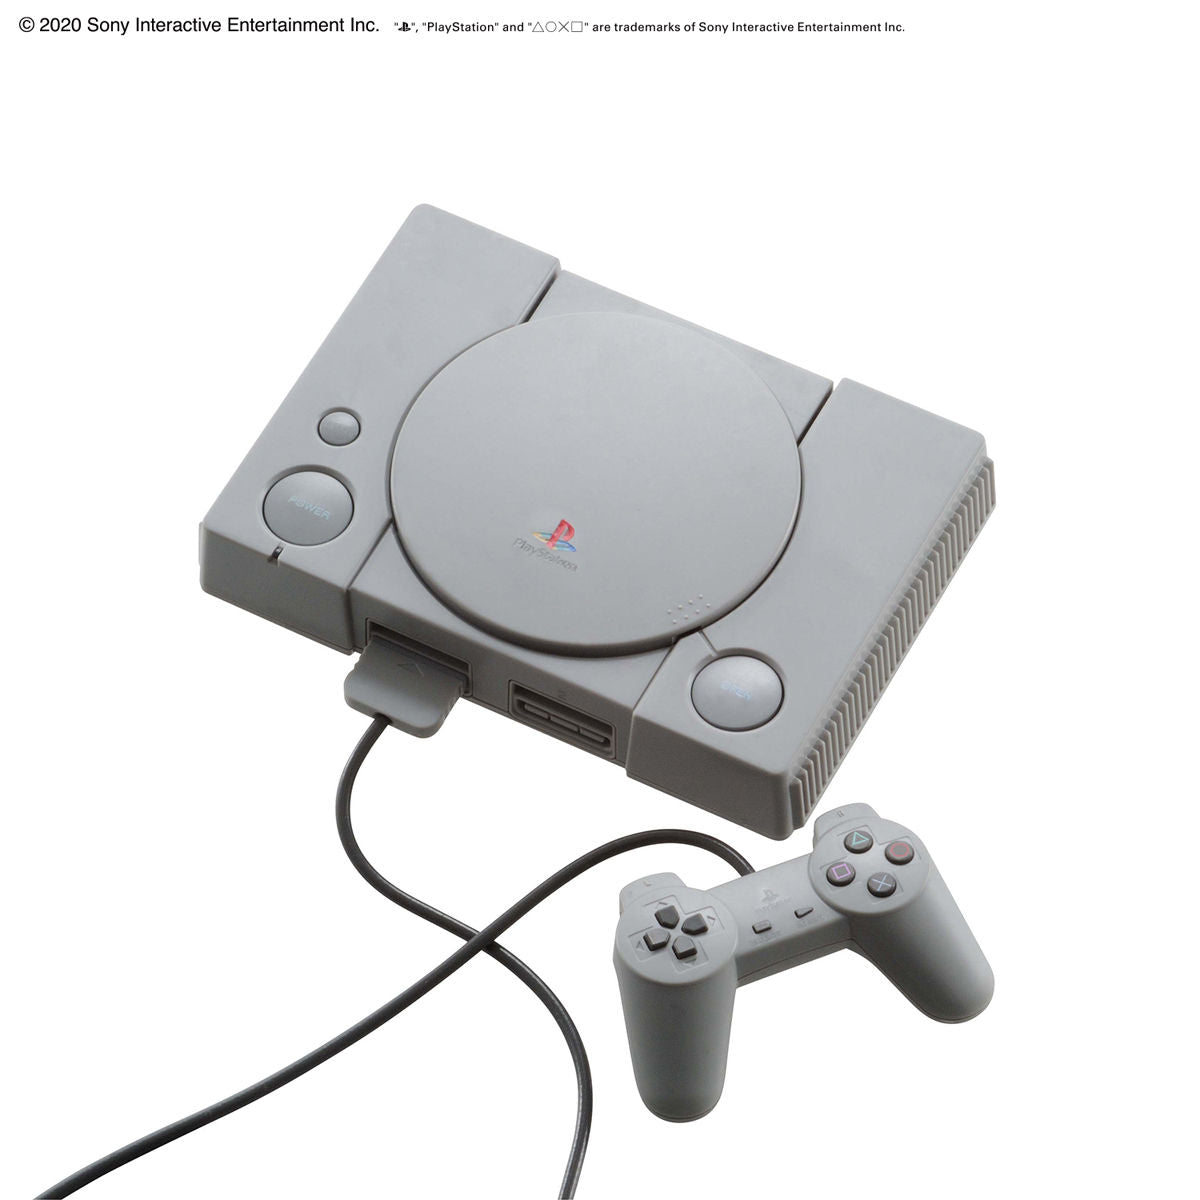 2/5 PLAYSTATION (SCPH-1000)